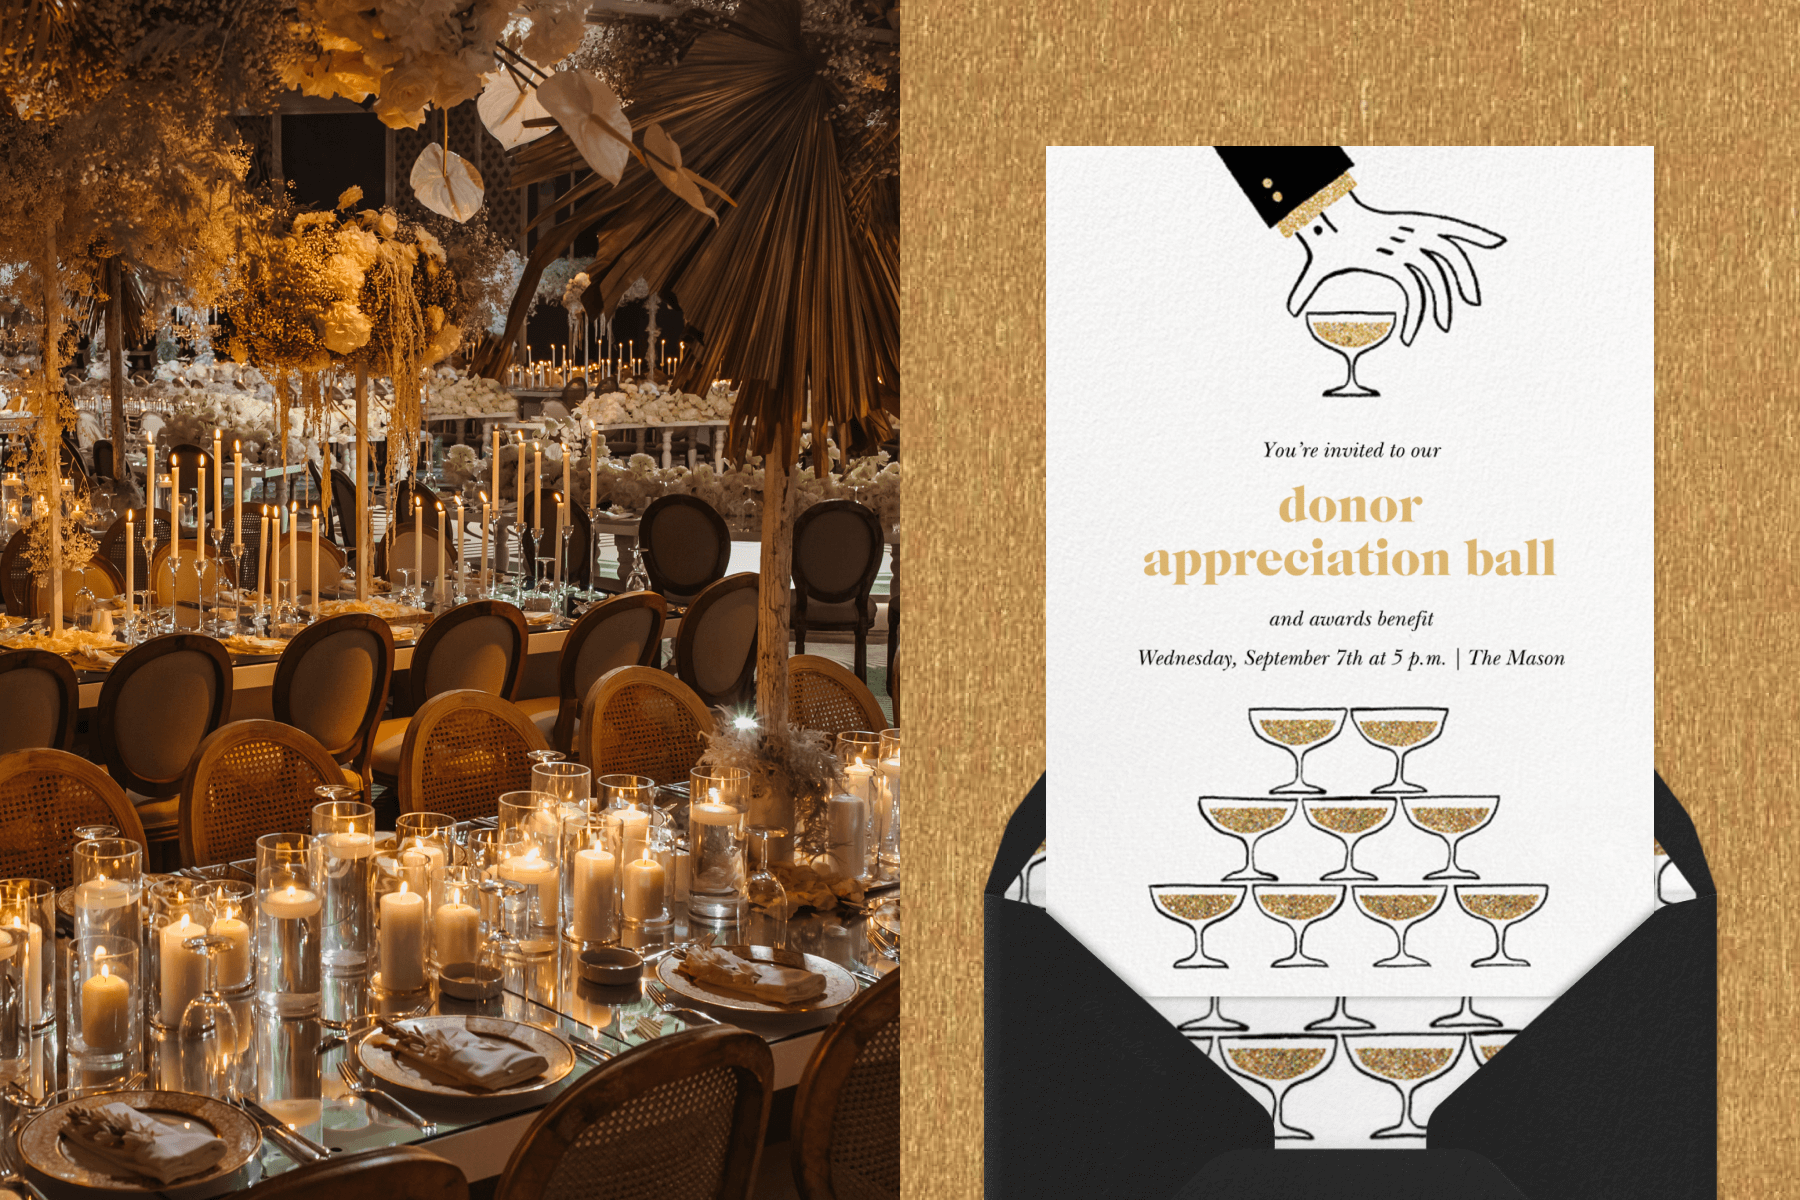 Left: A dimly lit party space with pampas and dried leaf floral arrangements on the ceiling, tons of pillar candles on banquet tables, and round rattan chairs. Right: A donor abbreviation ball invitation with a hand placing a gold-filled coup glass on top of a Champagne pyramid.